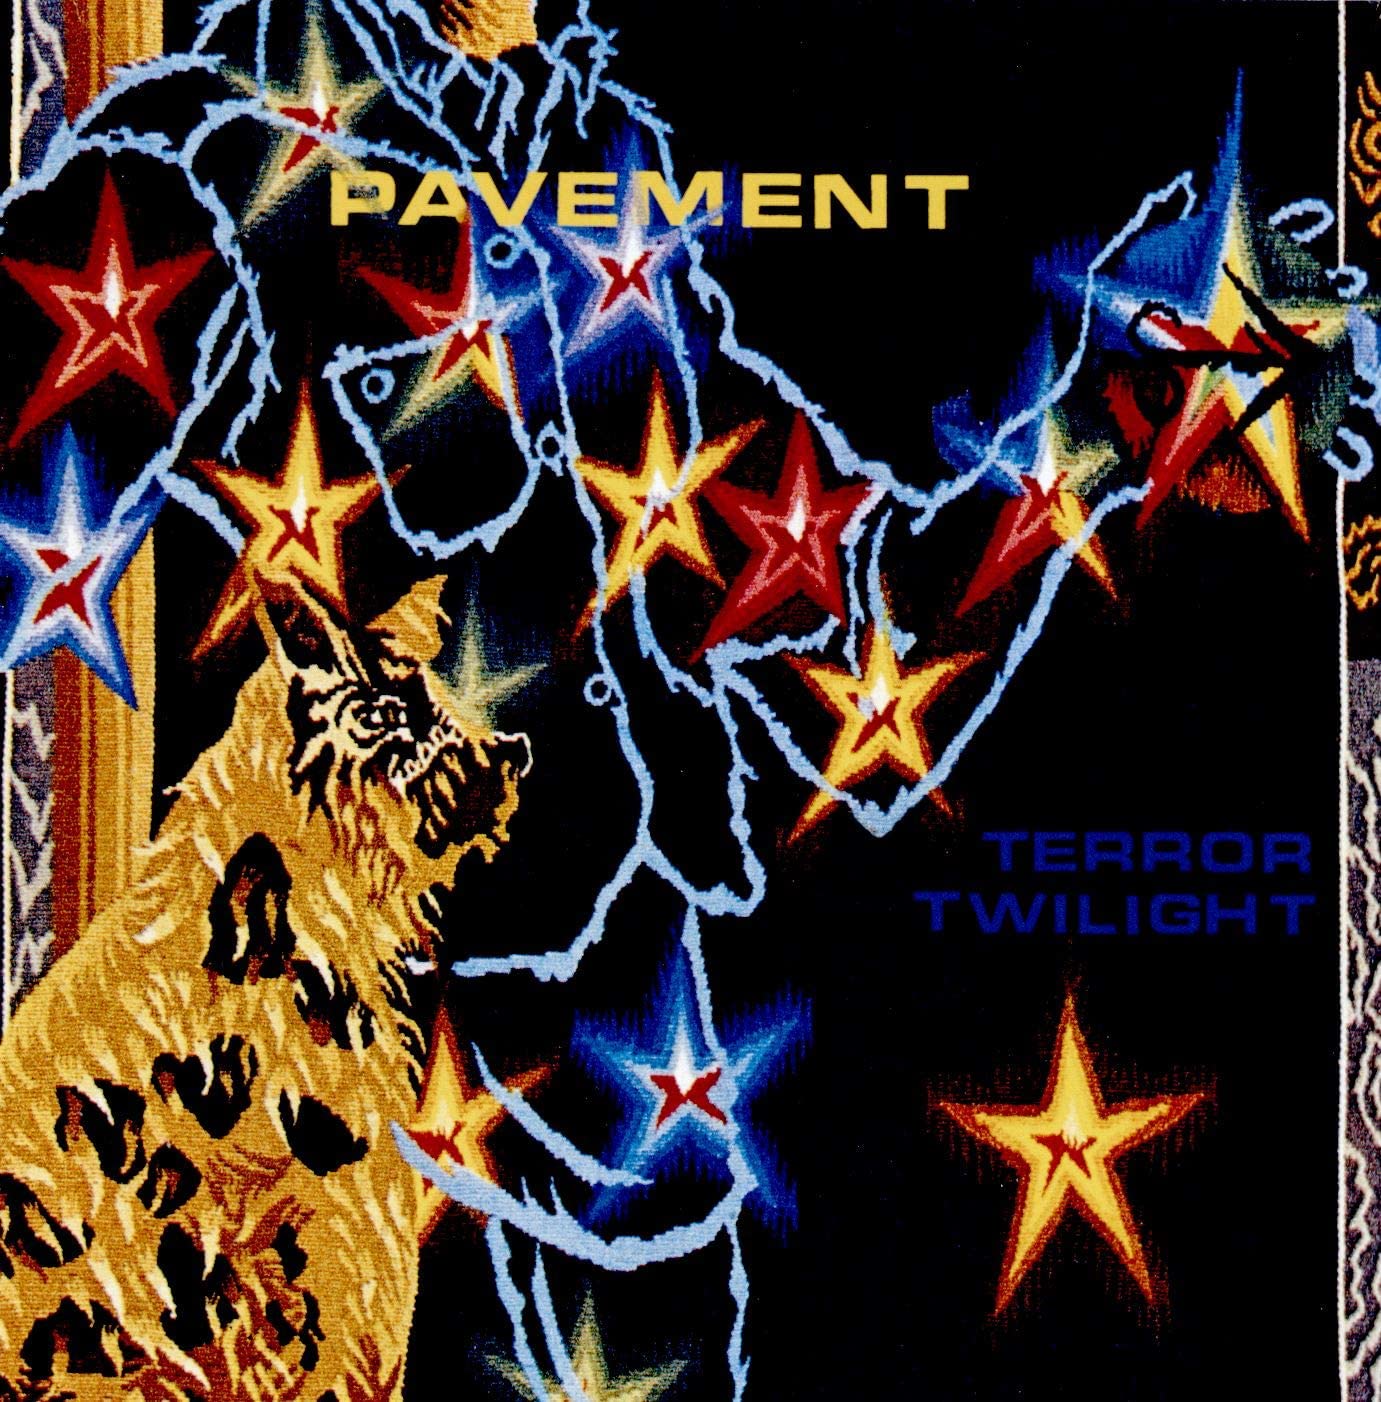 Final studio album on Vinyl from Pavement produced by Nigel Godrich and featuring Spit On A Stranger and The Hexx.